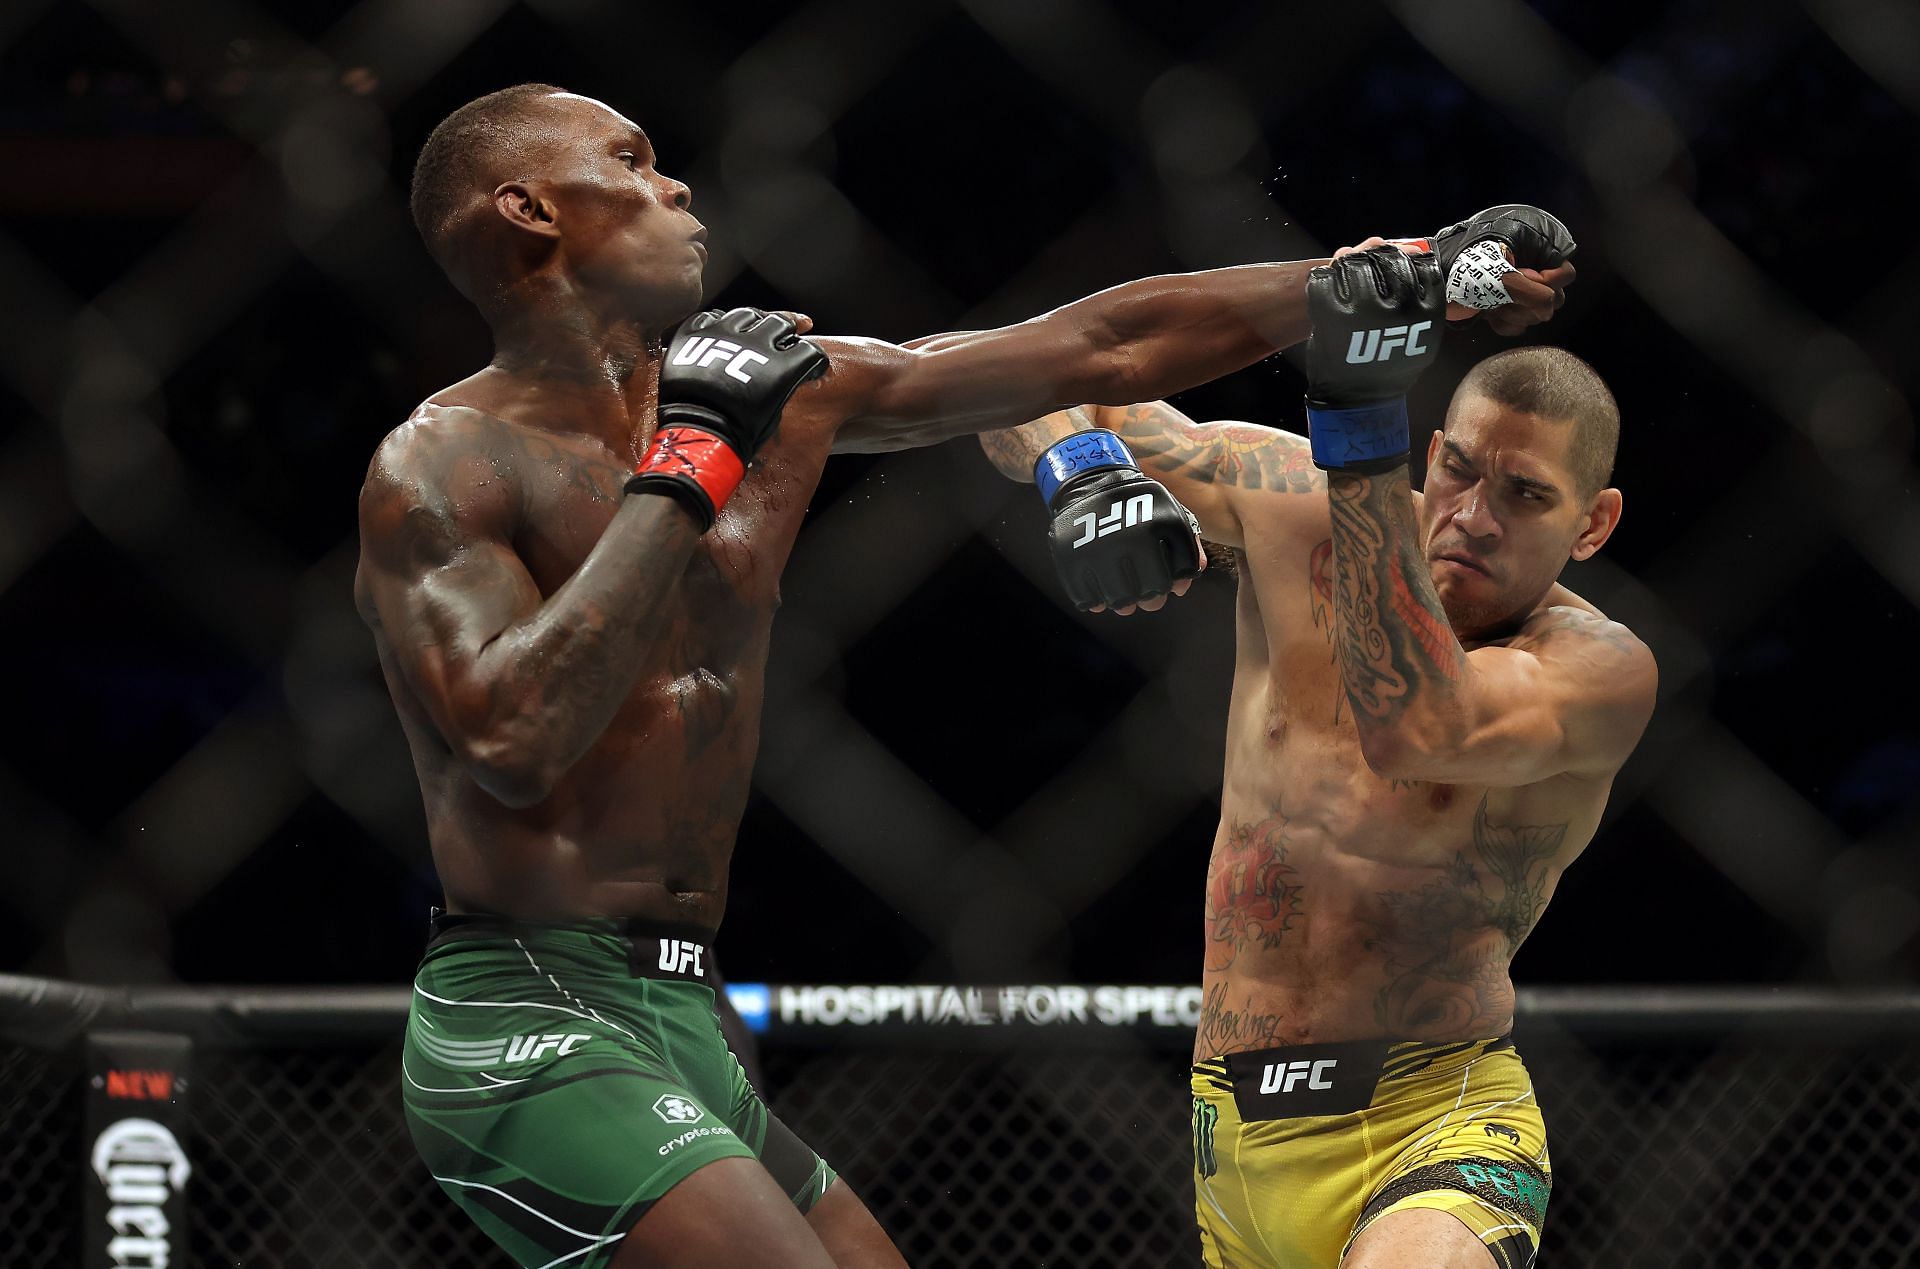 Alex Pereira holds three wins over Israel Adesanya, two via knockout